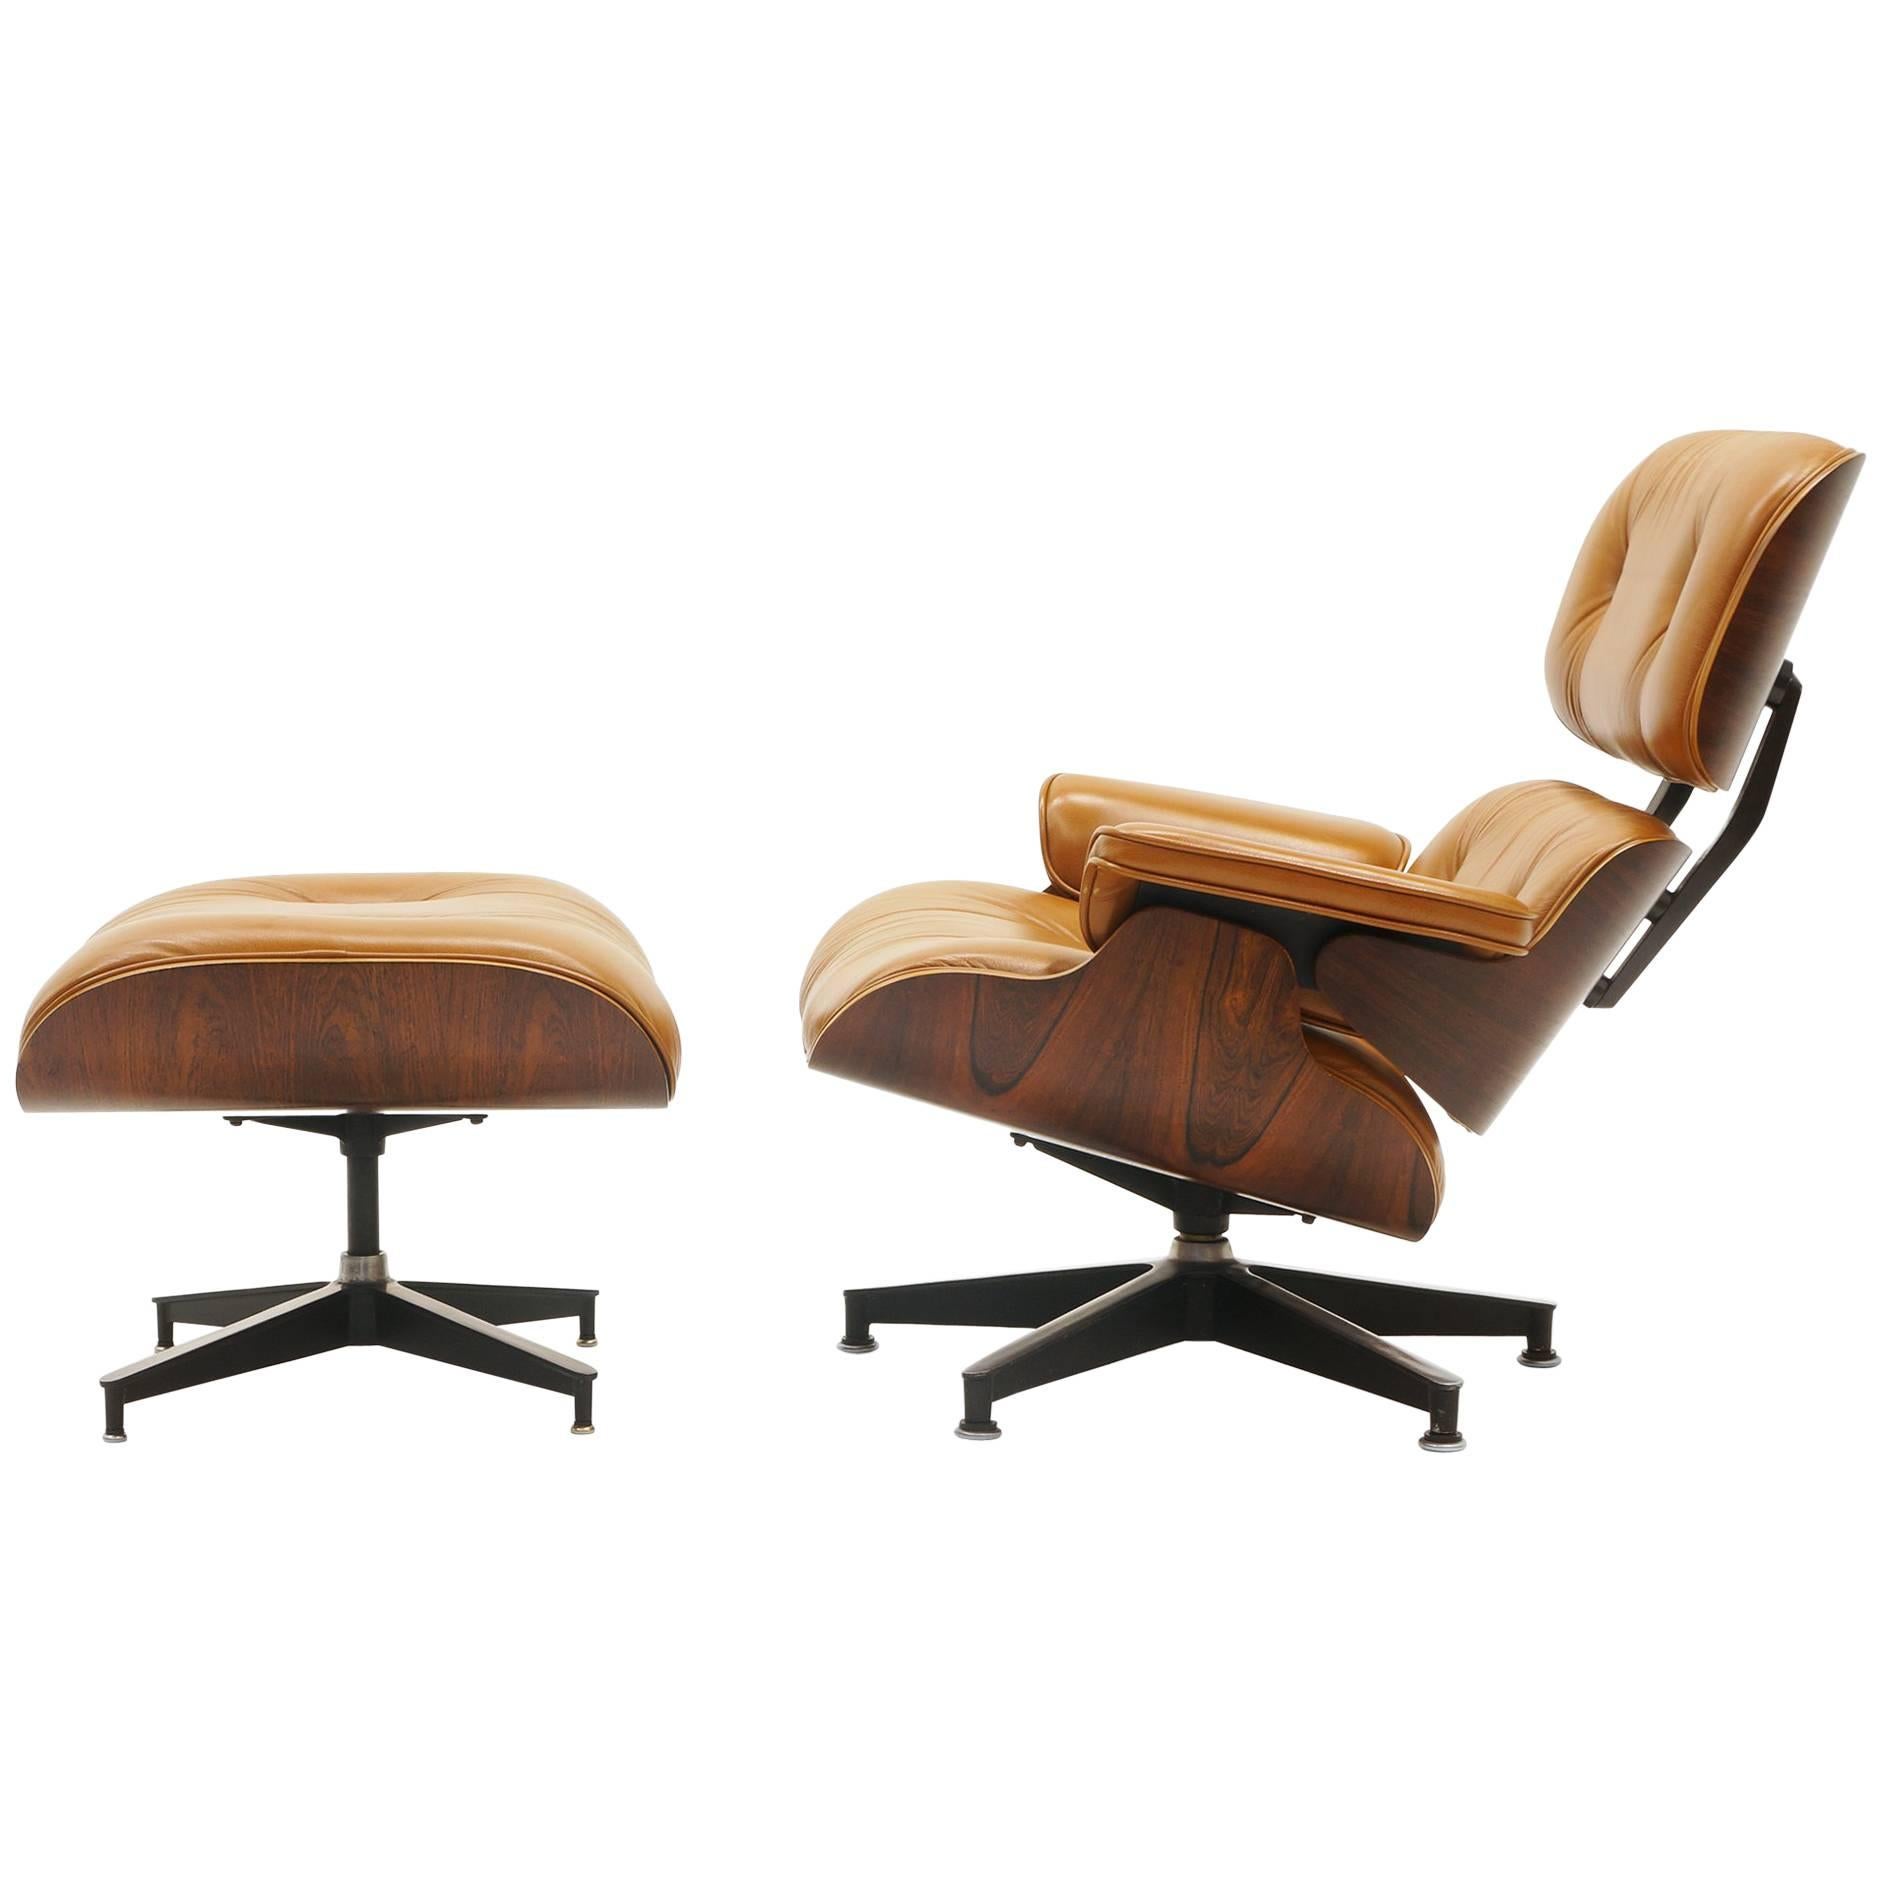 Eames Lounge Chair and Ottoman, Rosewood and Rare Cognac Leather